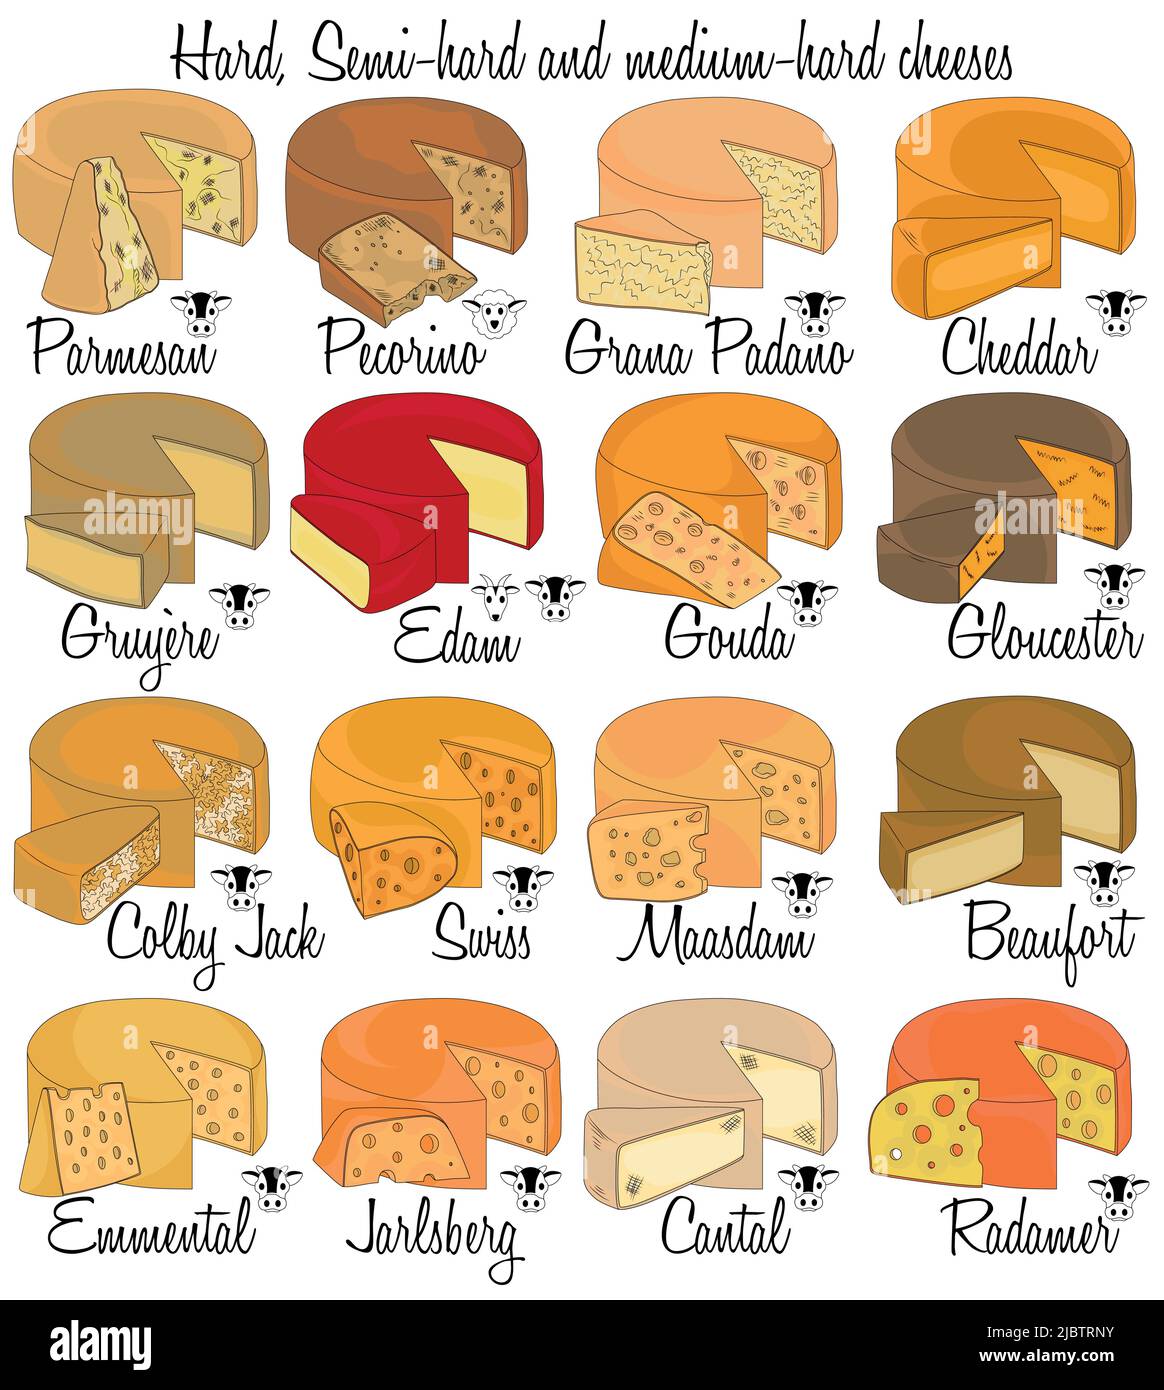 Hard, Semi-hard and medium-hard cheeses. Color hand-drawn types of cheese with characteristics of each type. Stock Vector